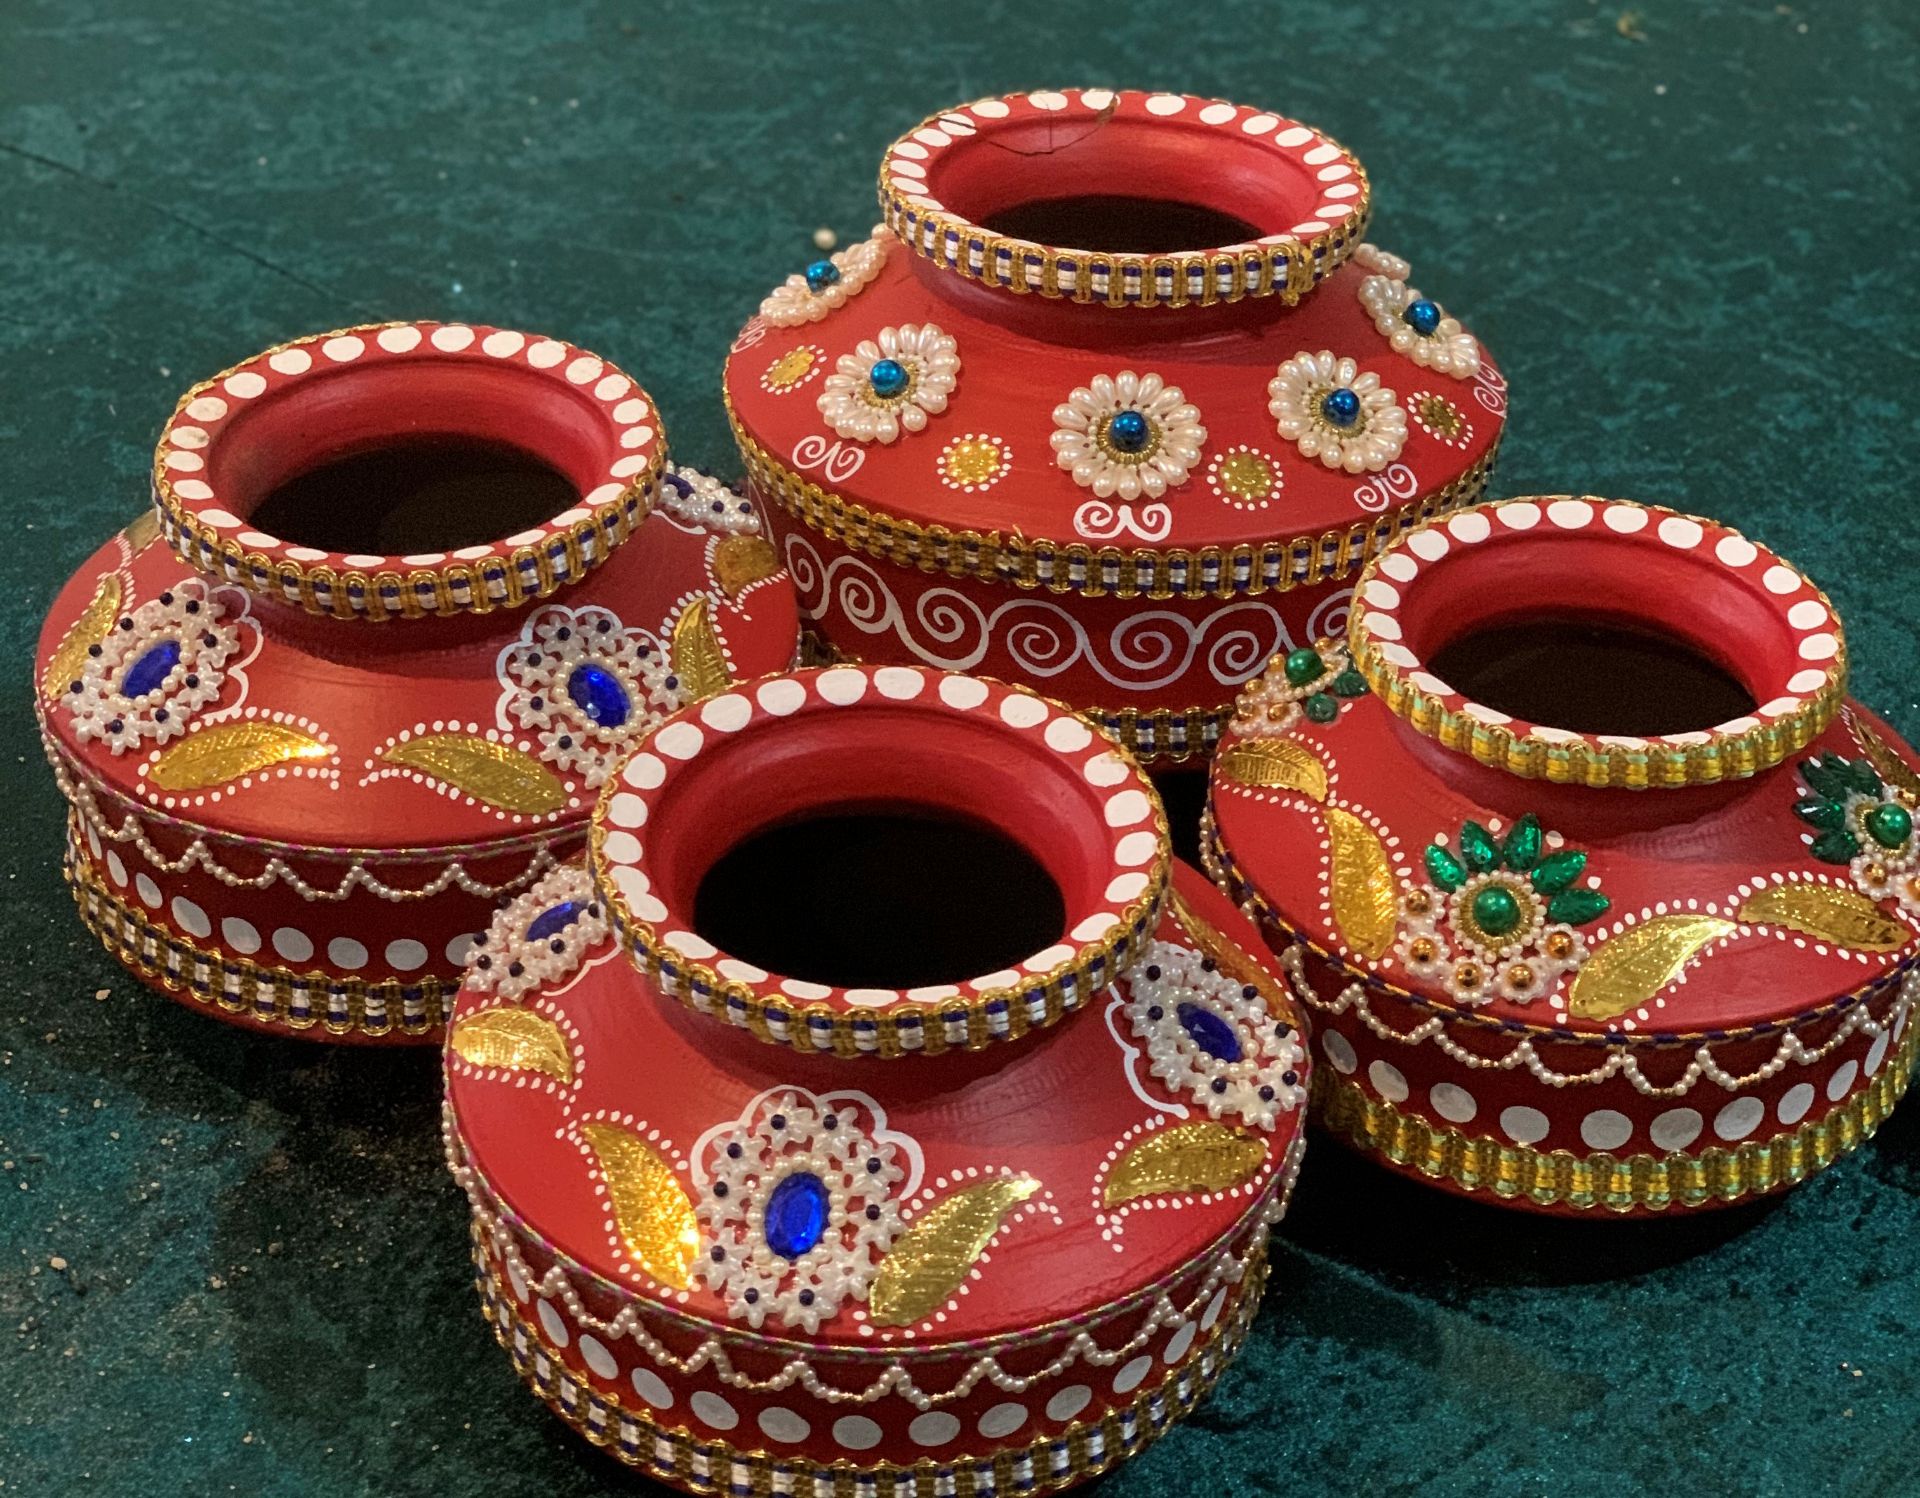 4 x Assorted Decorated Red Indian Pots - Dimensions: Mixed - Ref: Lot 103 - CL548 - Location: Near